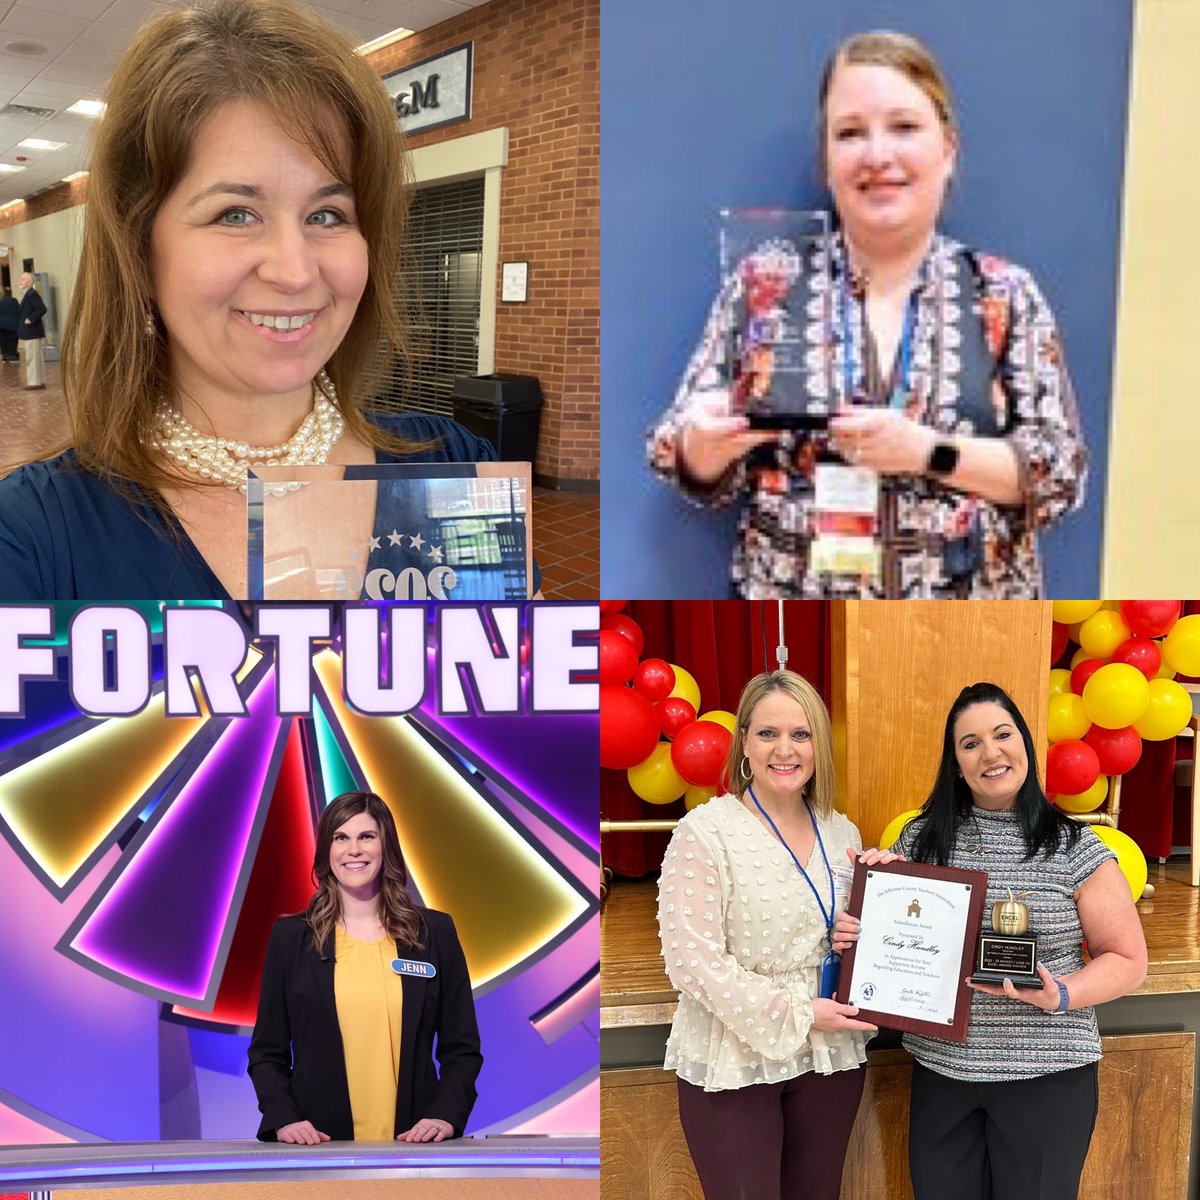 What a week for JCASL librarians! @WaggenerLibrary's Ms. Heckel won the SLATE Intellectual Freedom Award, Ms. Barrows @MsB_DuBoisLMS won the Gretchen Niva Service Award, Ms. Koch @chargerslms spun the wheel on @WheelofFortune, & @cindy_hundley won the Excel Award!

#JCPSLibraries